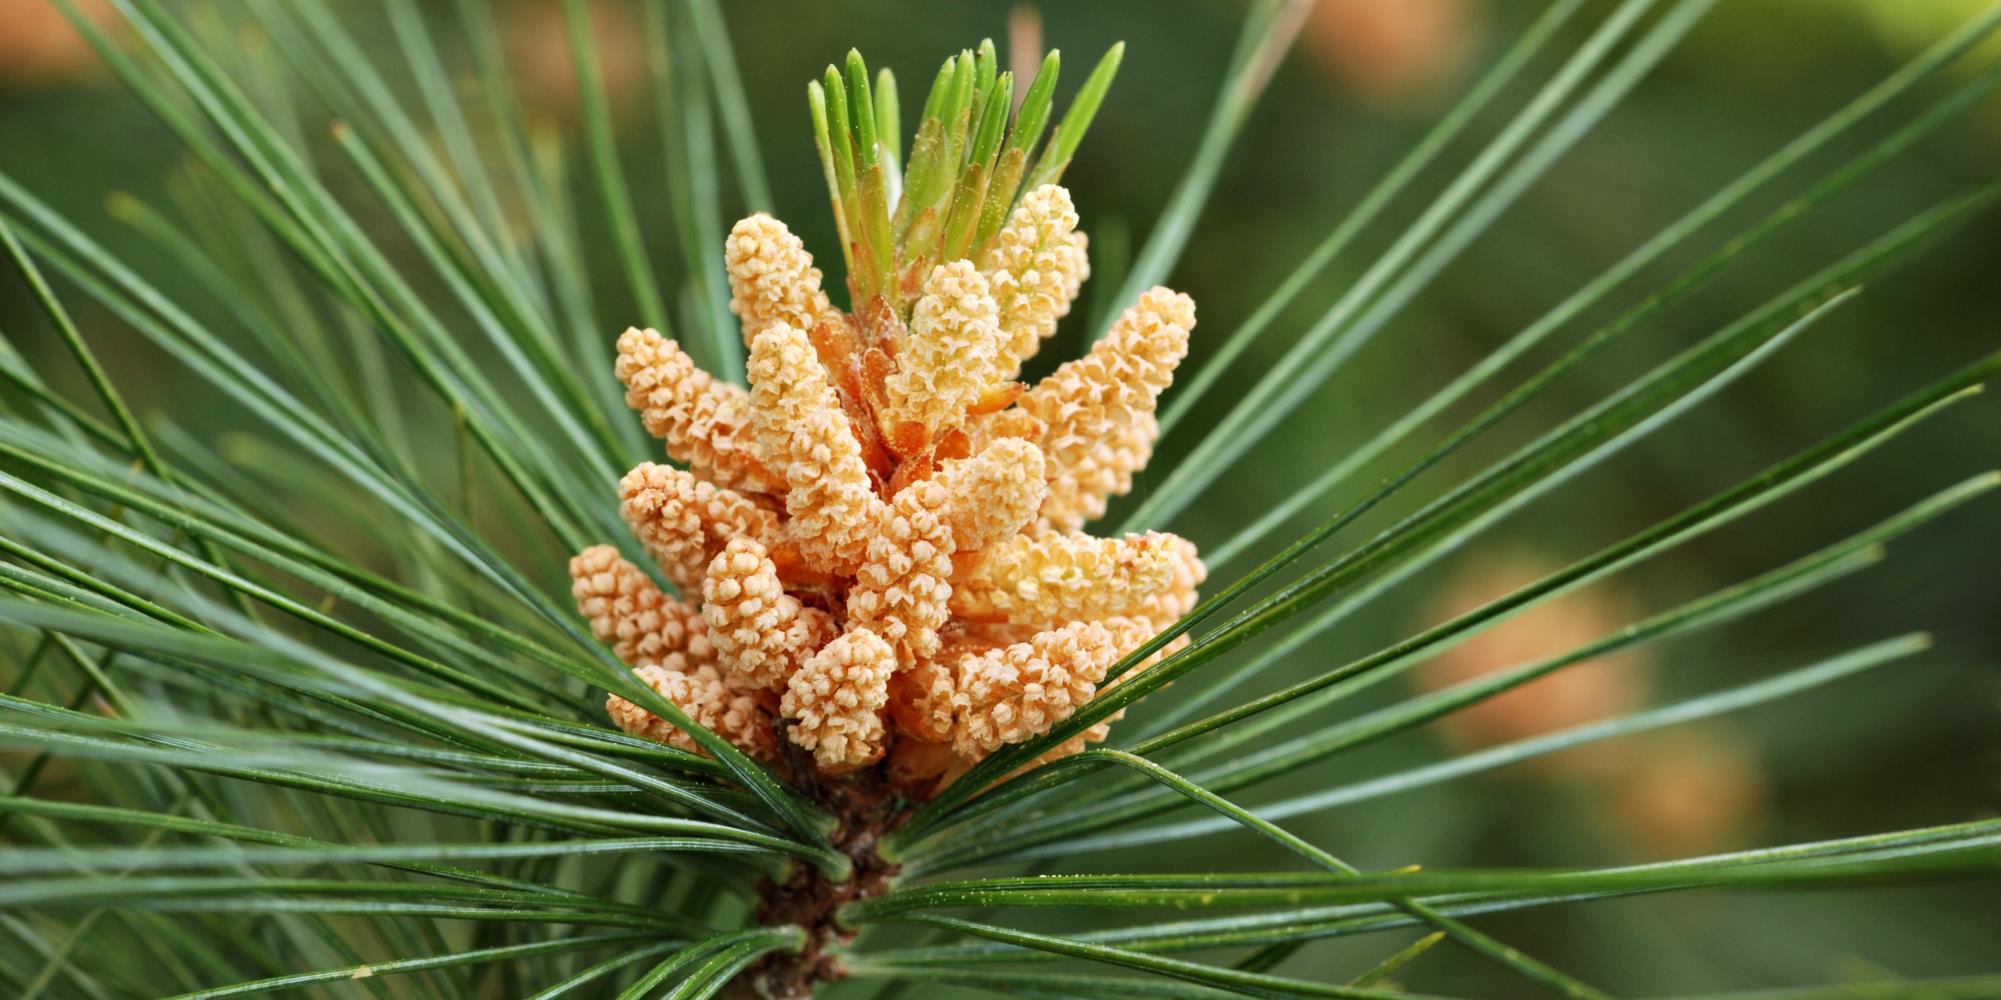 What are the health benefits of white pine?